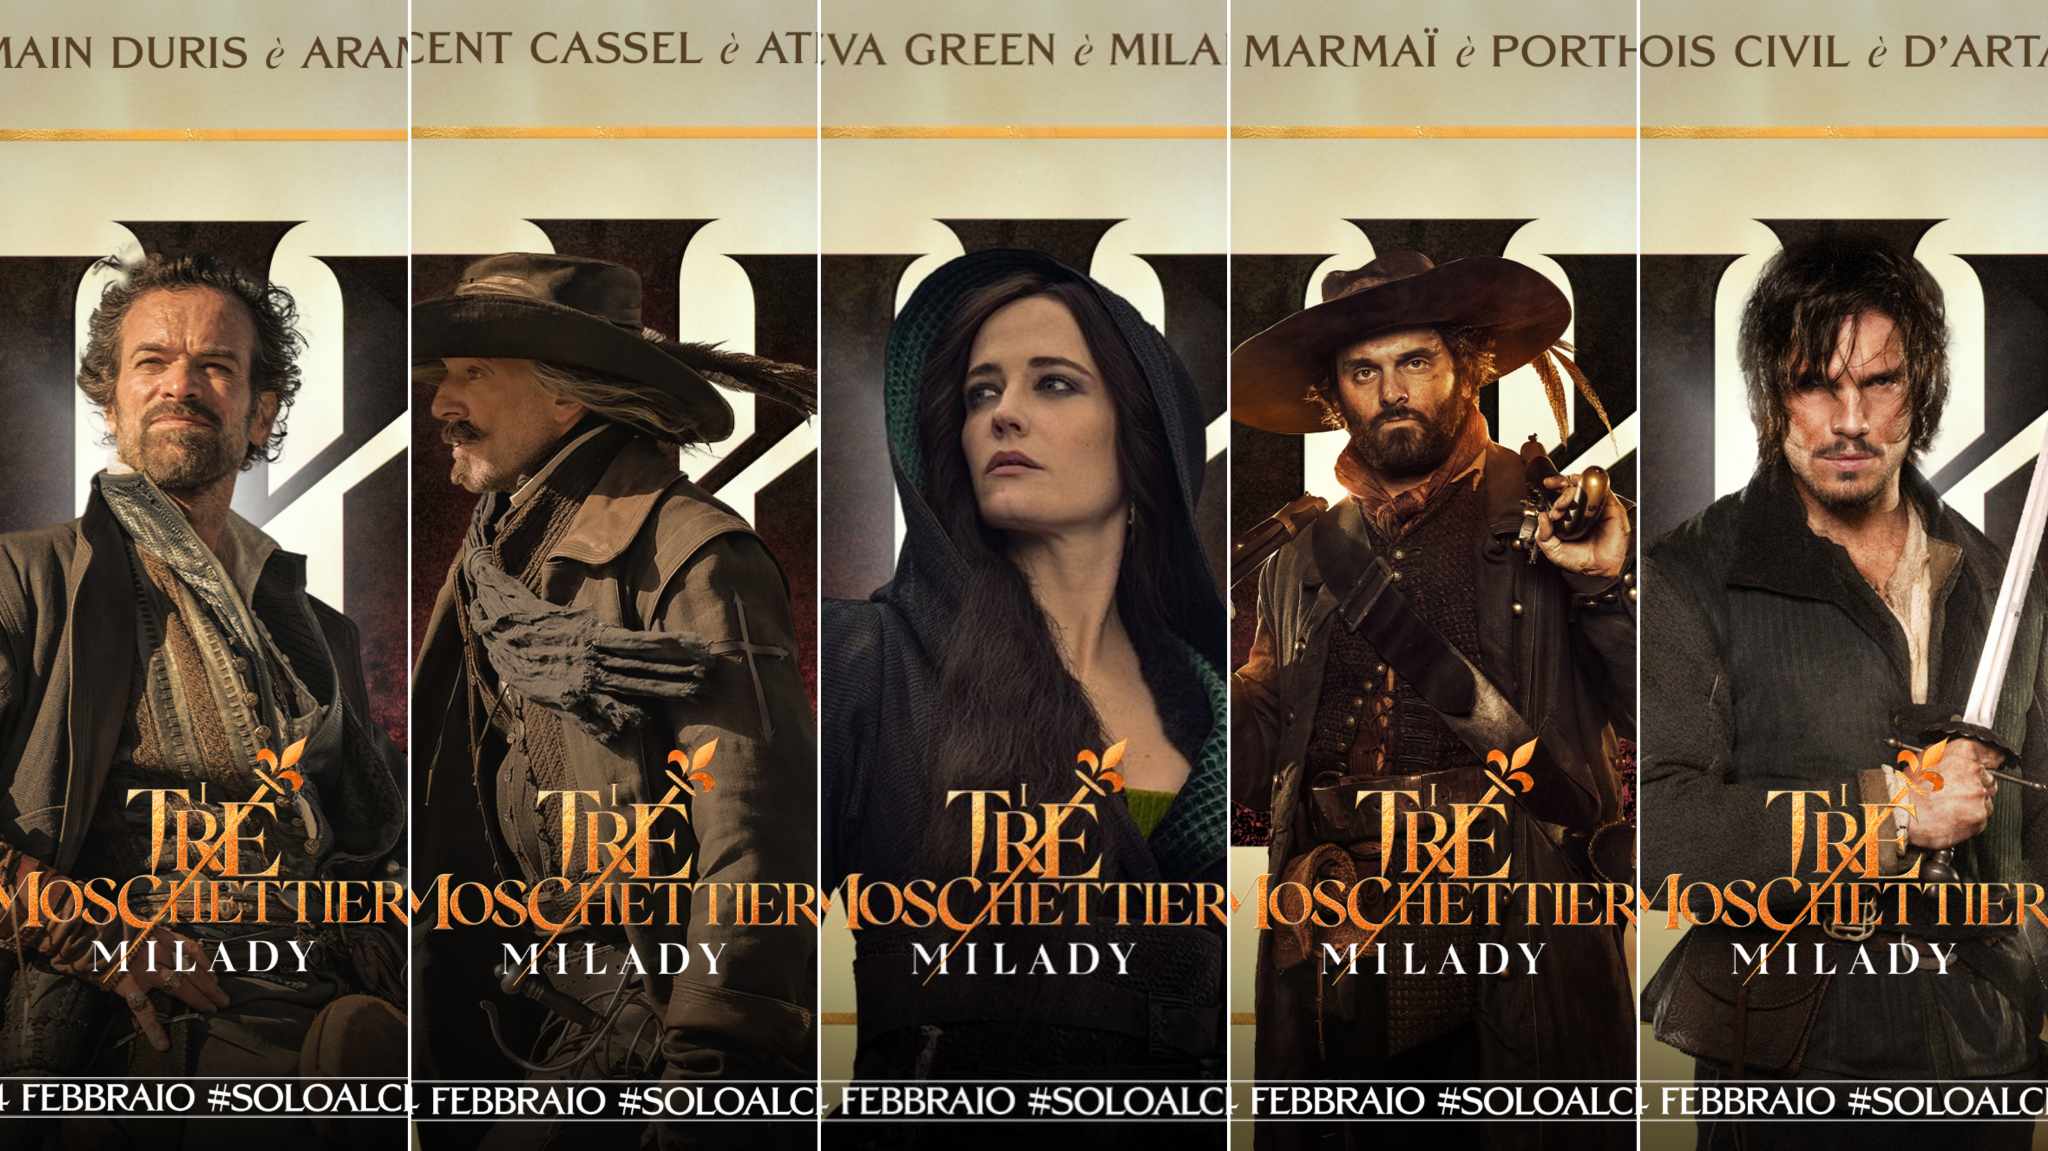 collage character poster i tre moschettieri milady